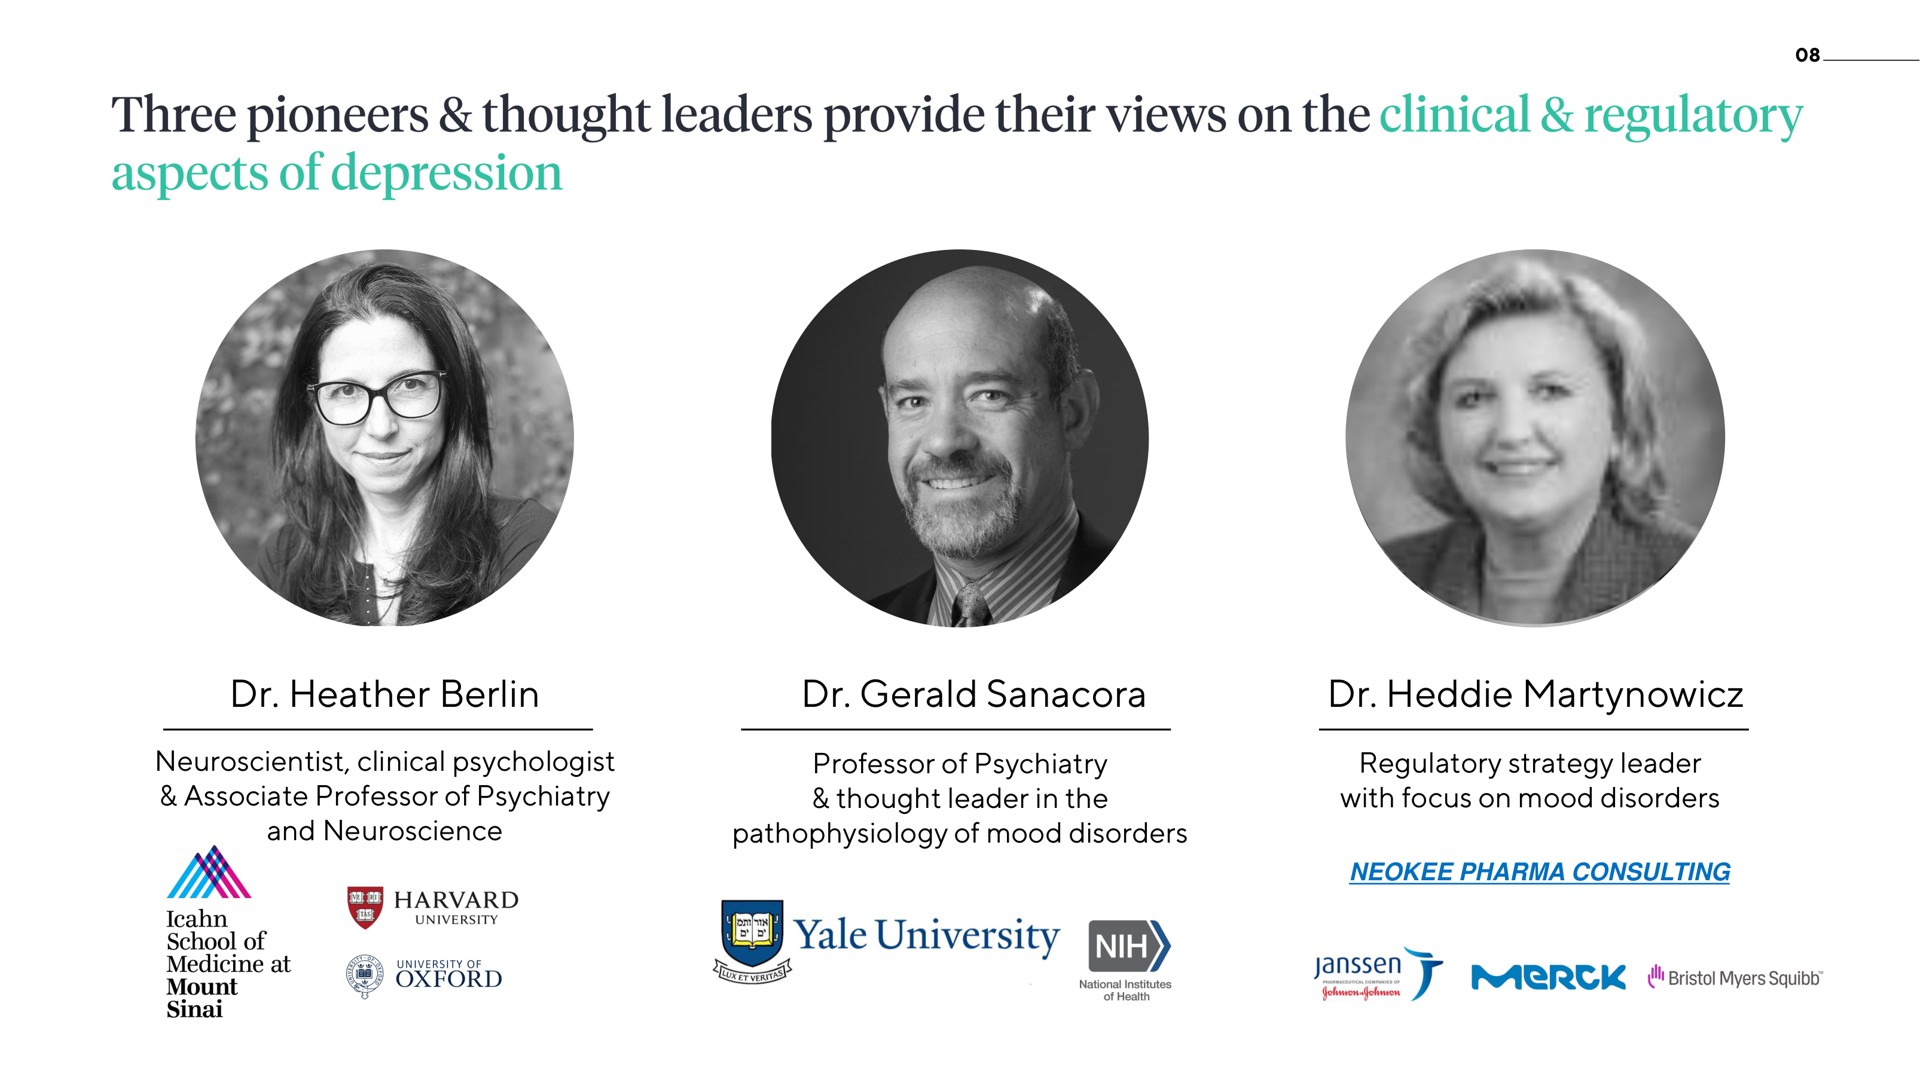 heather berlin clinical psychologist associate professor of psychiatry and professor of psychiatry thought leader in the of mood disorders regulatory strategy leader with focus on mood disorders consulting three pioneers leaders provide their views aspects depression | ATAI